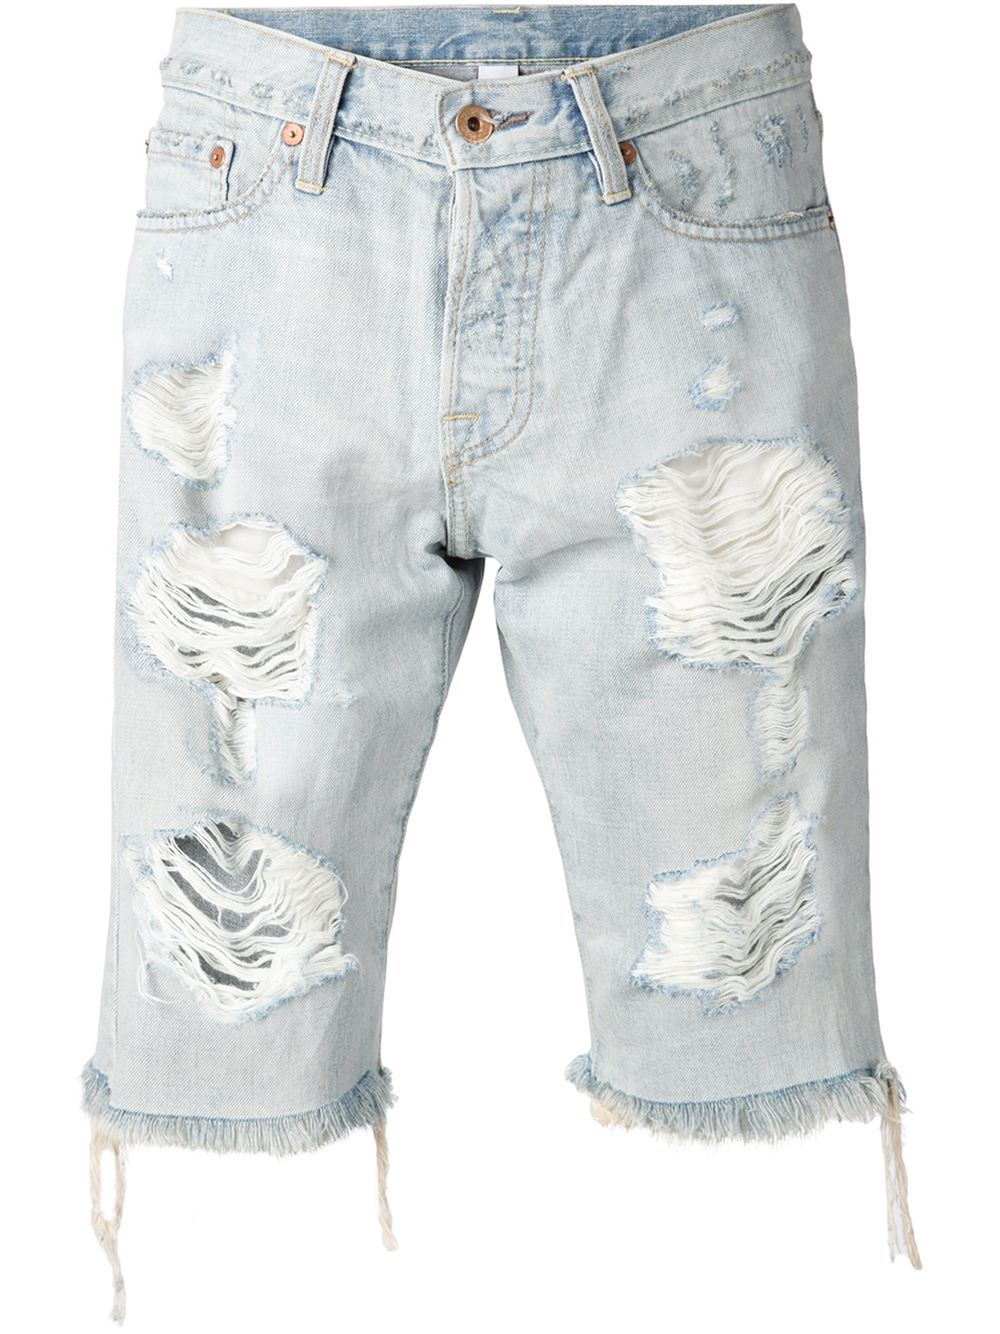 Bliss and Mischief Distressed Denim Shorts in Blue for Men - Lyst